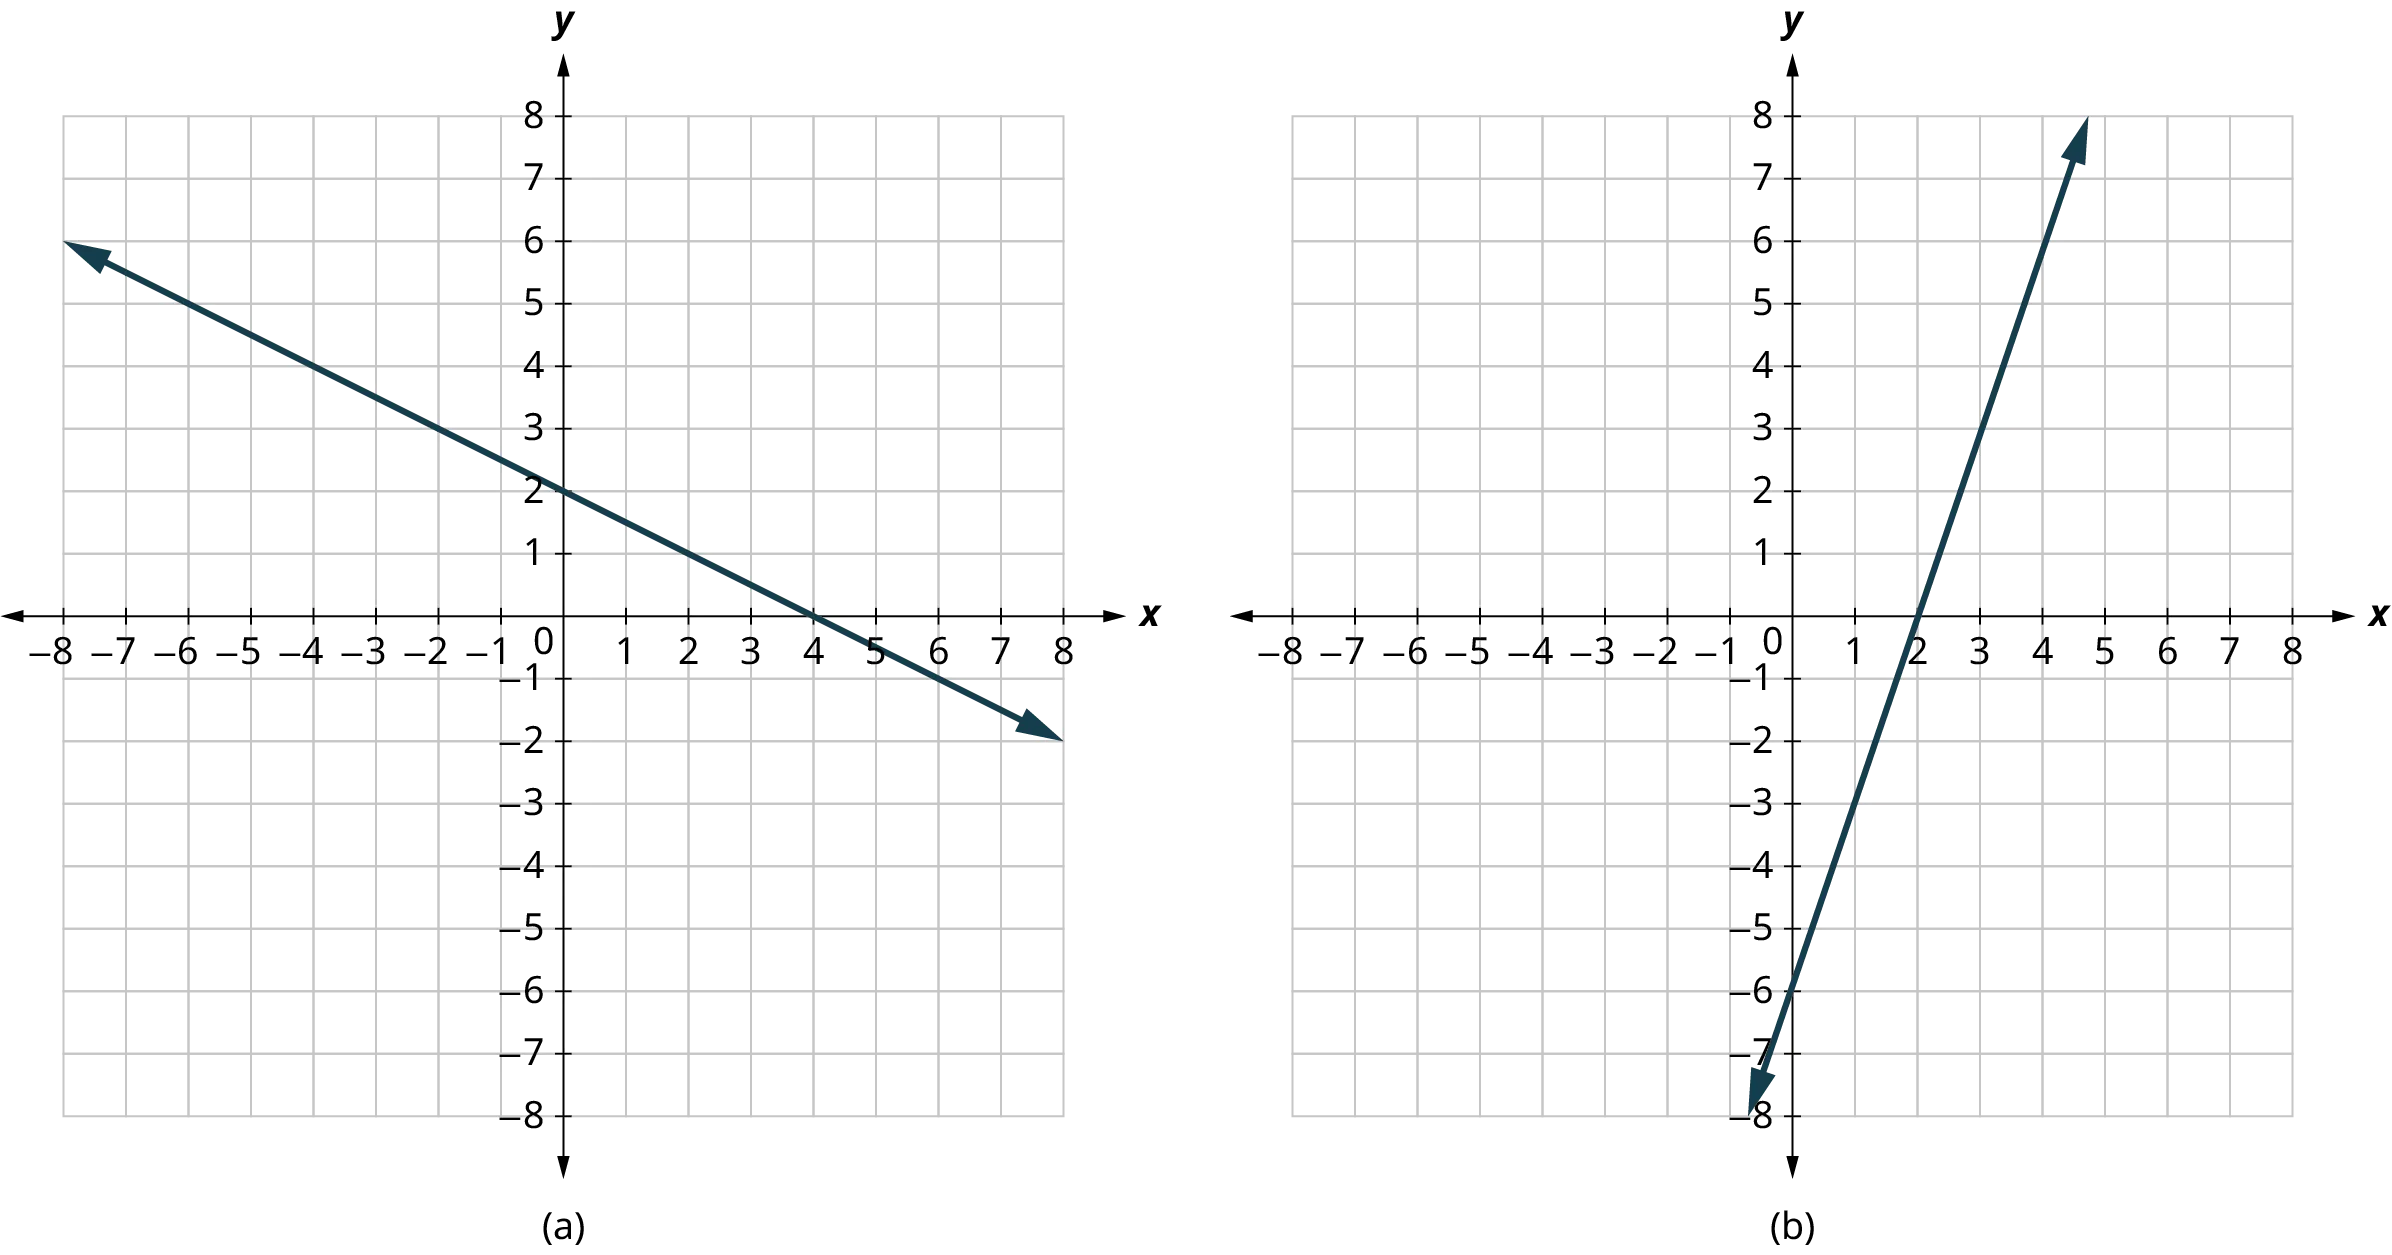 Two x y coordinate planes labeled (a) and (b). In each coordinate plane, the x and y axes range from negative 8 to 8, in increments of 1. Graph (a) shows a line that passes through the following points, (negative 8, 6), (0, 2), (4, 0), and (8, negative 2). Graph (b) shows a line that passes through the following points, (0, negative 6), (2, 0), and (5, 6). Note: all values are approximate.